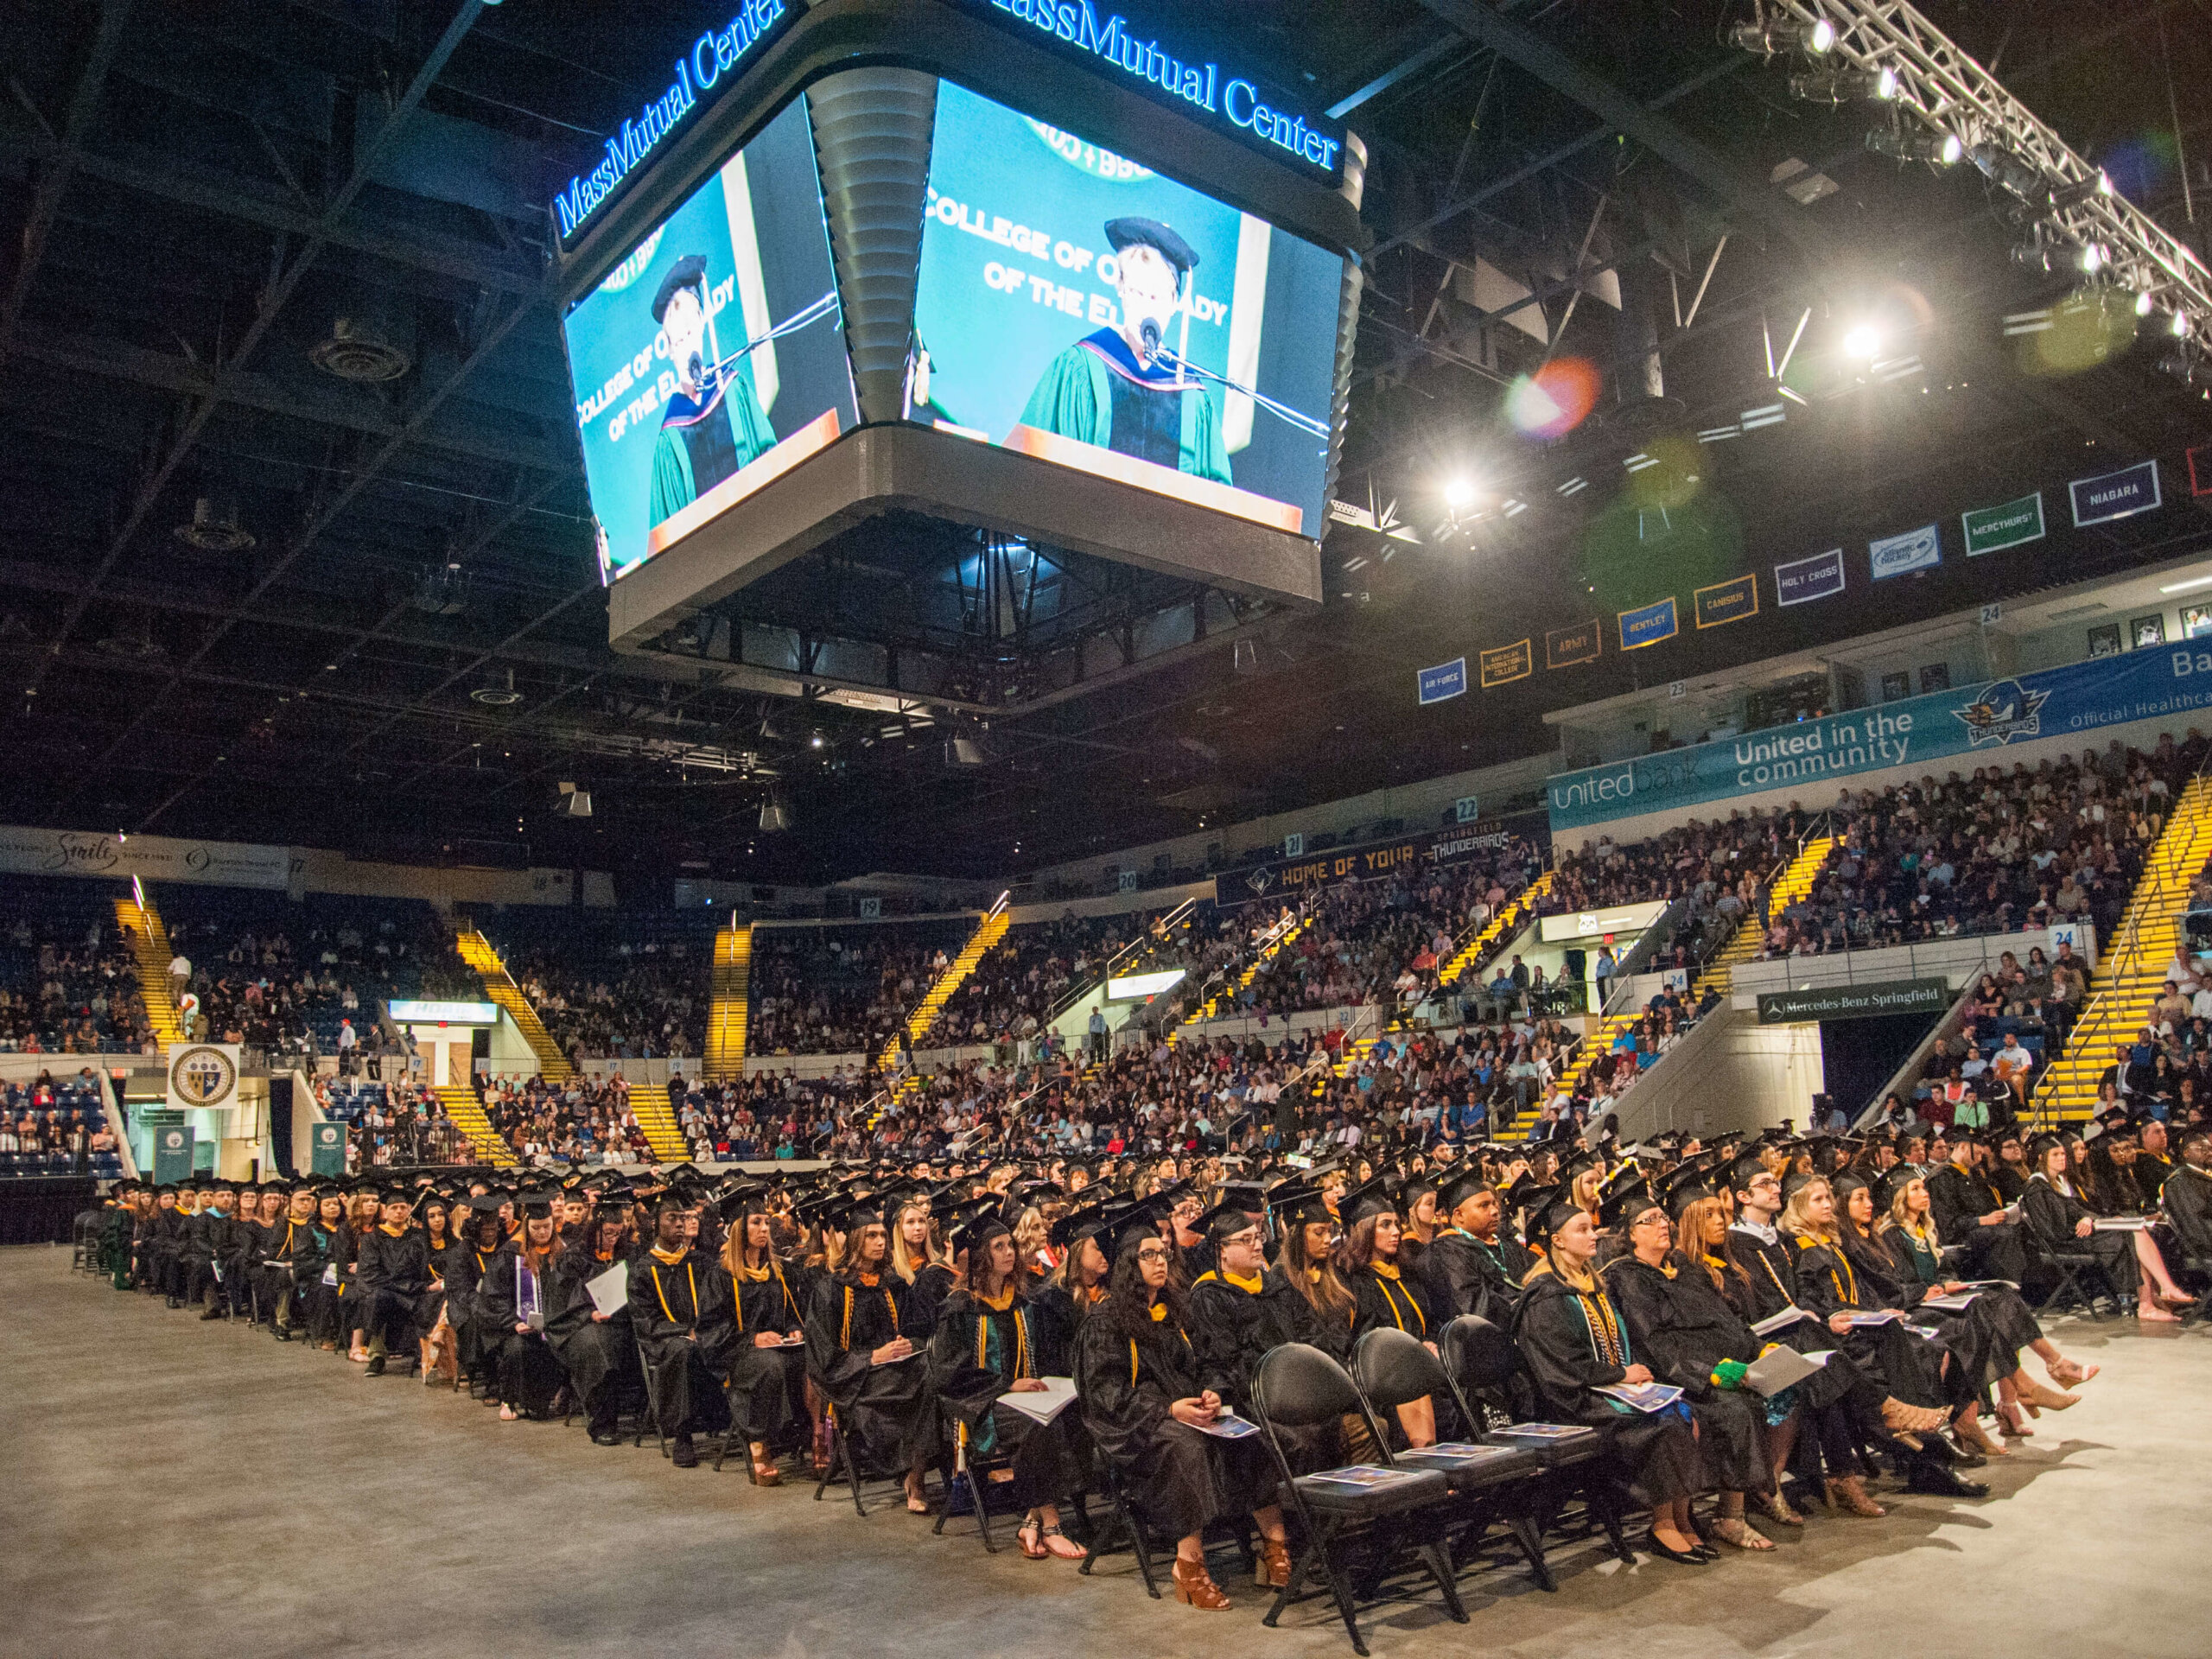 Image from the 2018 Commencement ceremony